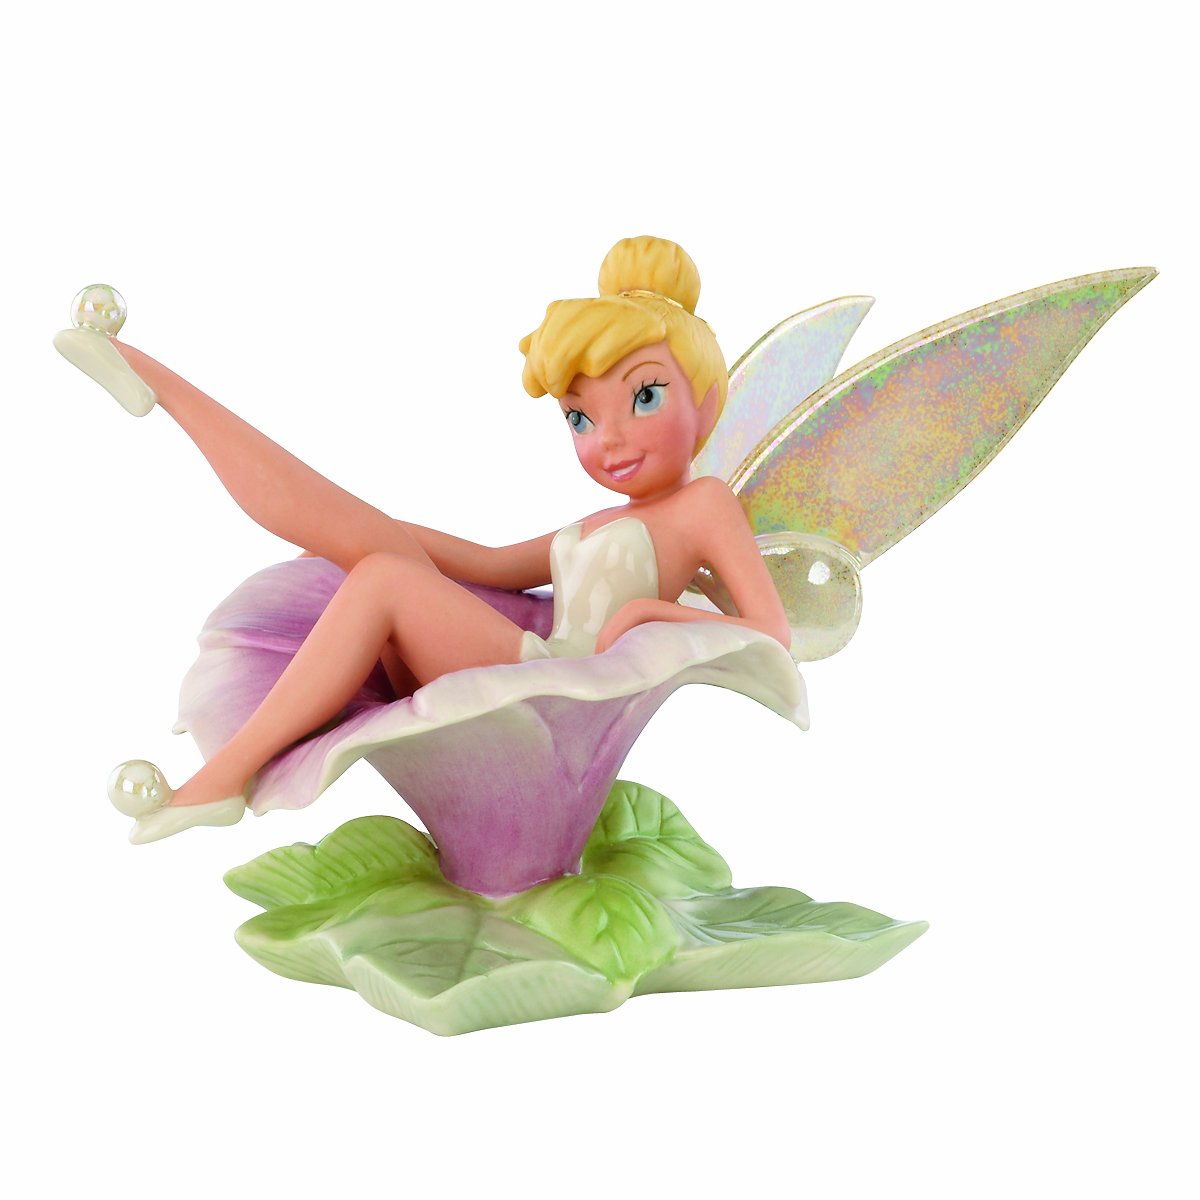 Tink's Flowery Frolic